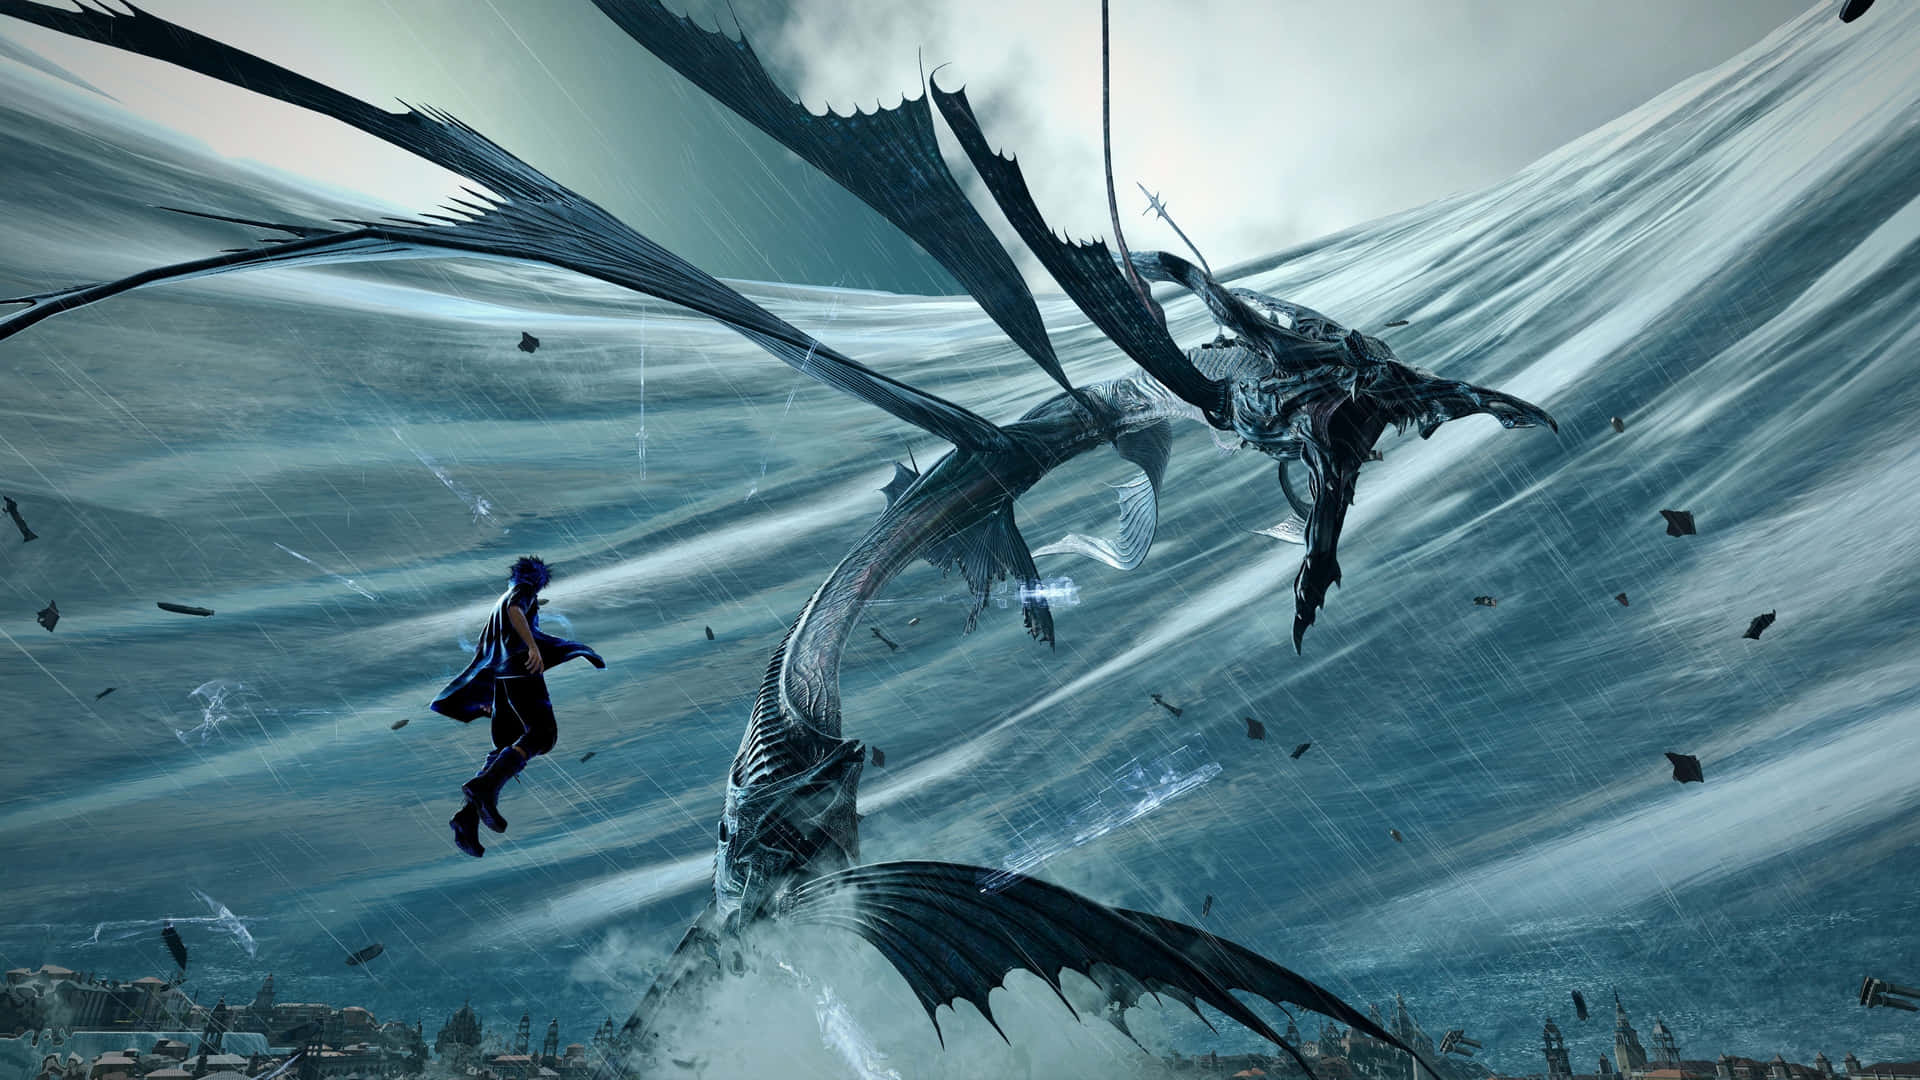 An exciting action shot from Final Fantasy 15 Wallpaper